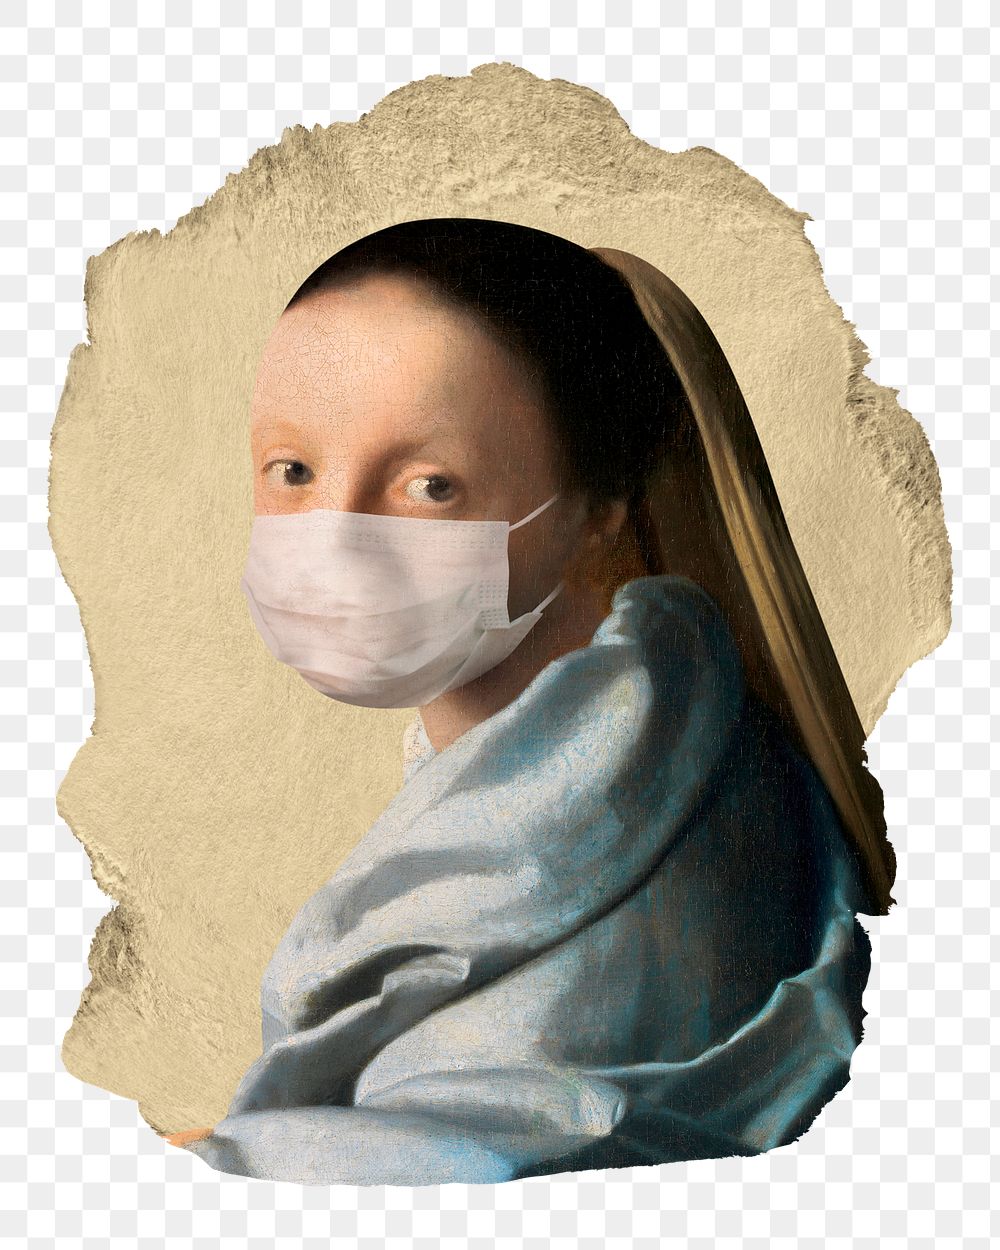 Png Vermeer's young girl wearing mask sticker, vintage illustration on ripped paper, transparent background